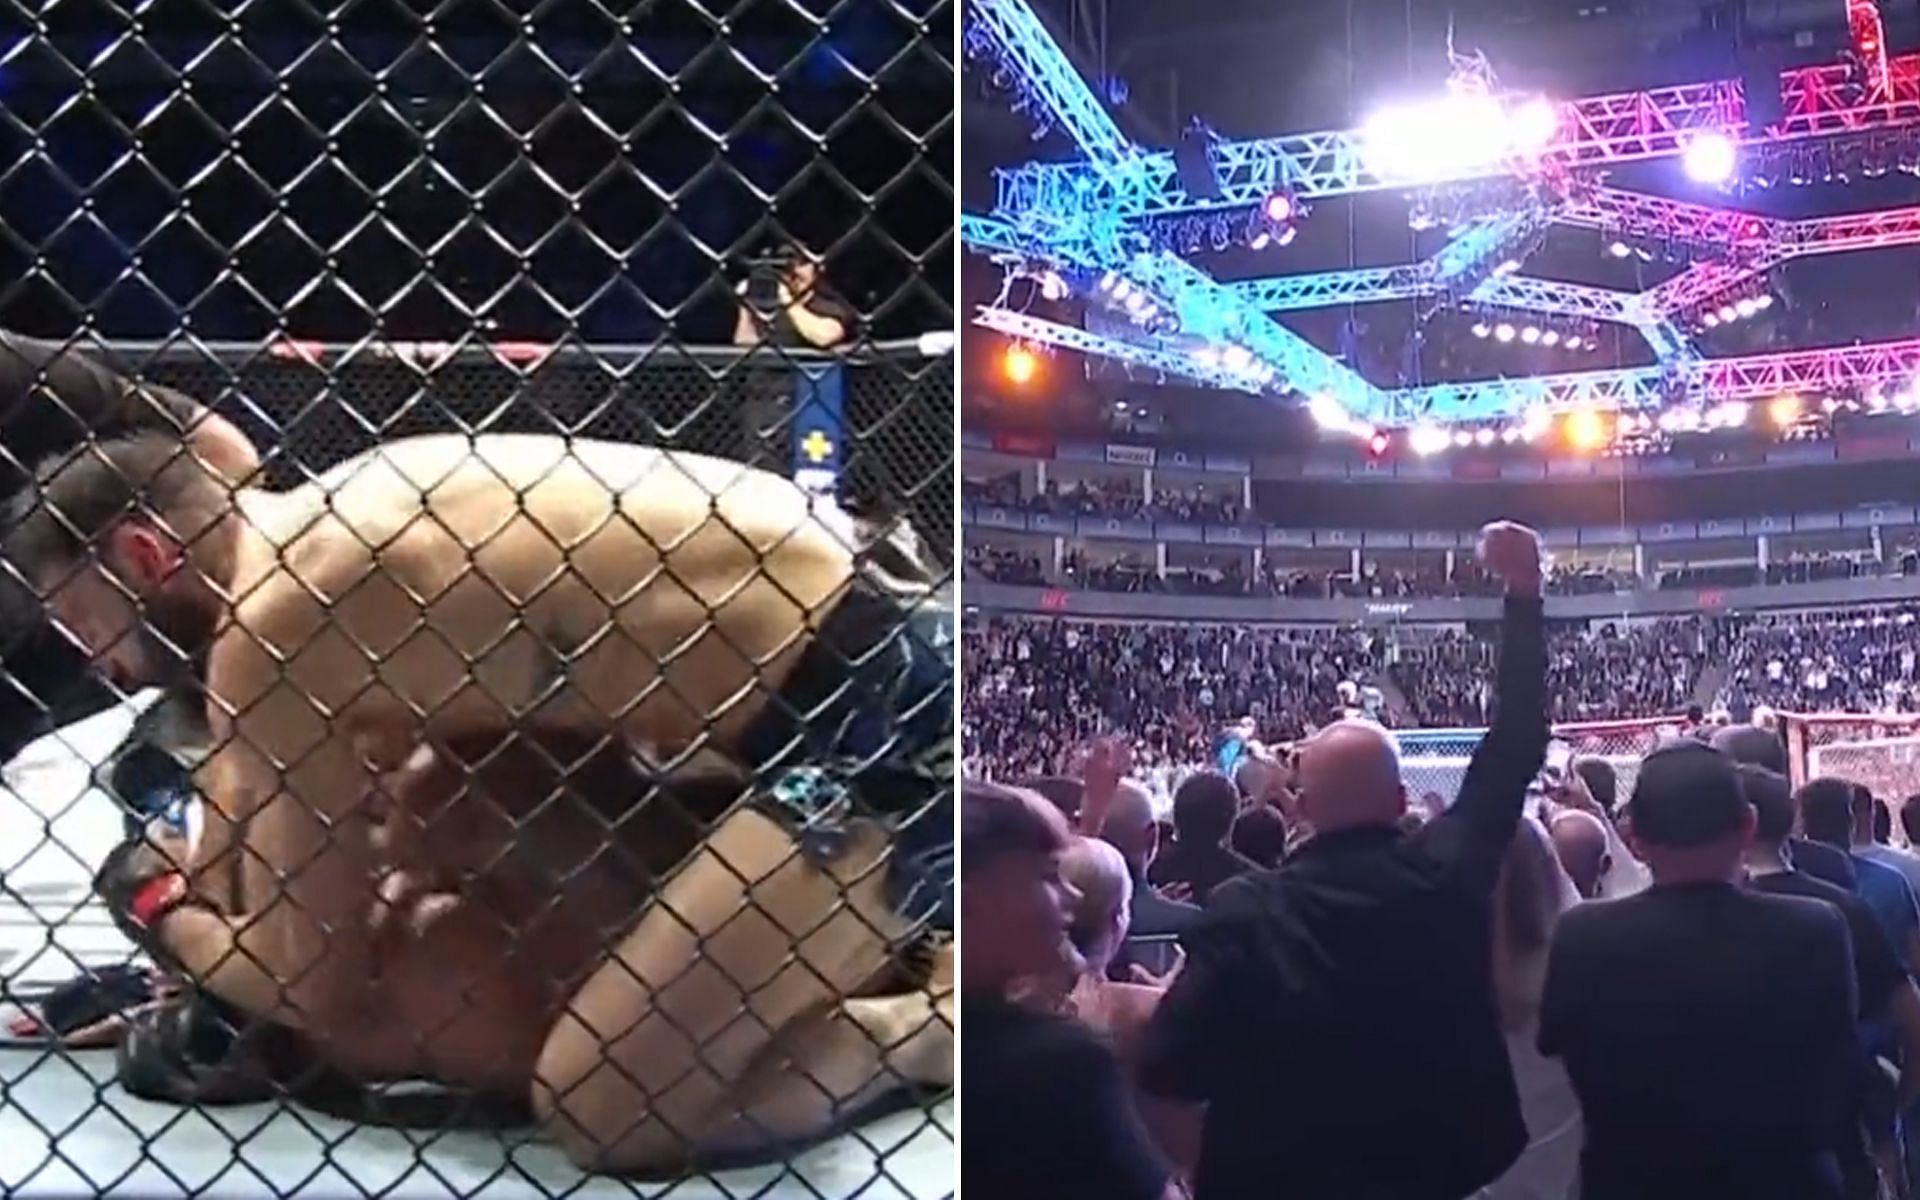 Paul Craig Ufc London Erupts After Crowd Favorite Paul Craig Makes A Statement With Dominant